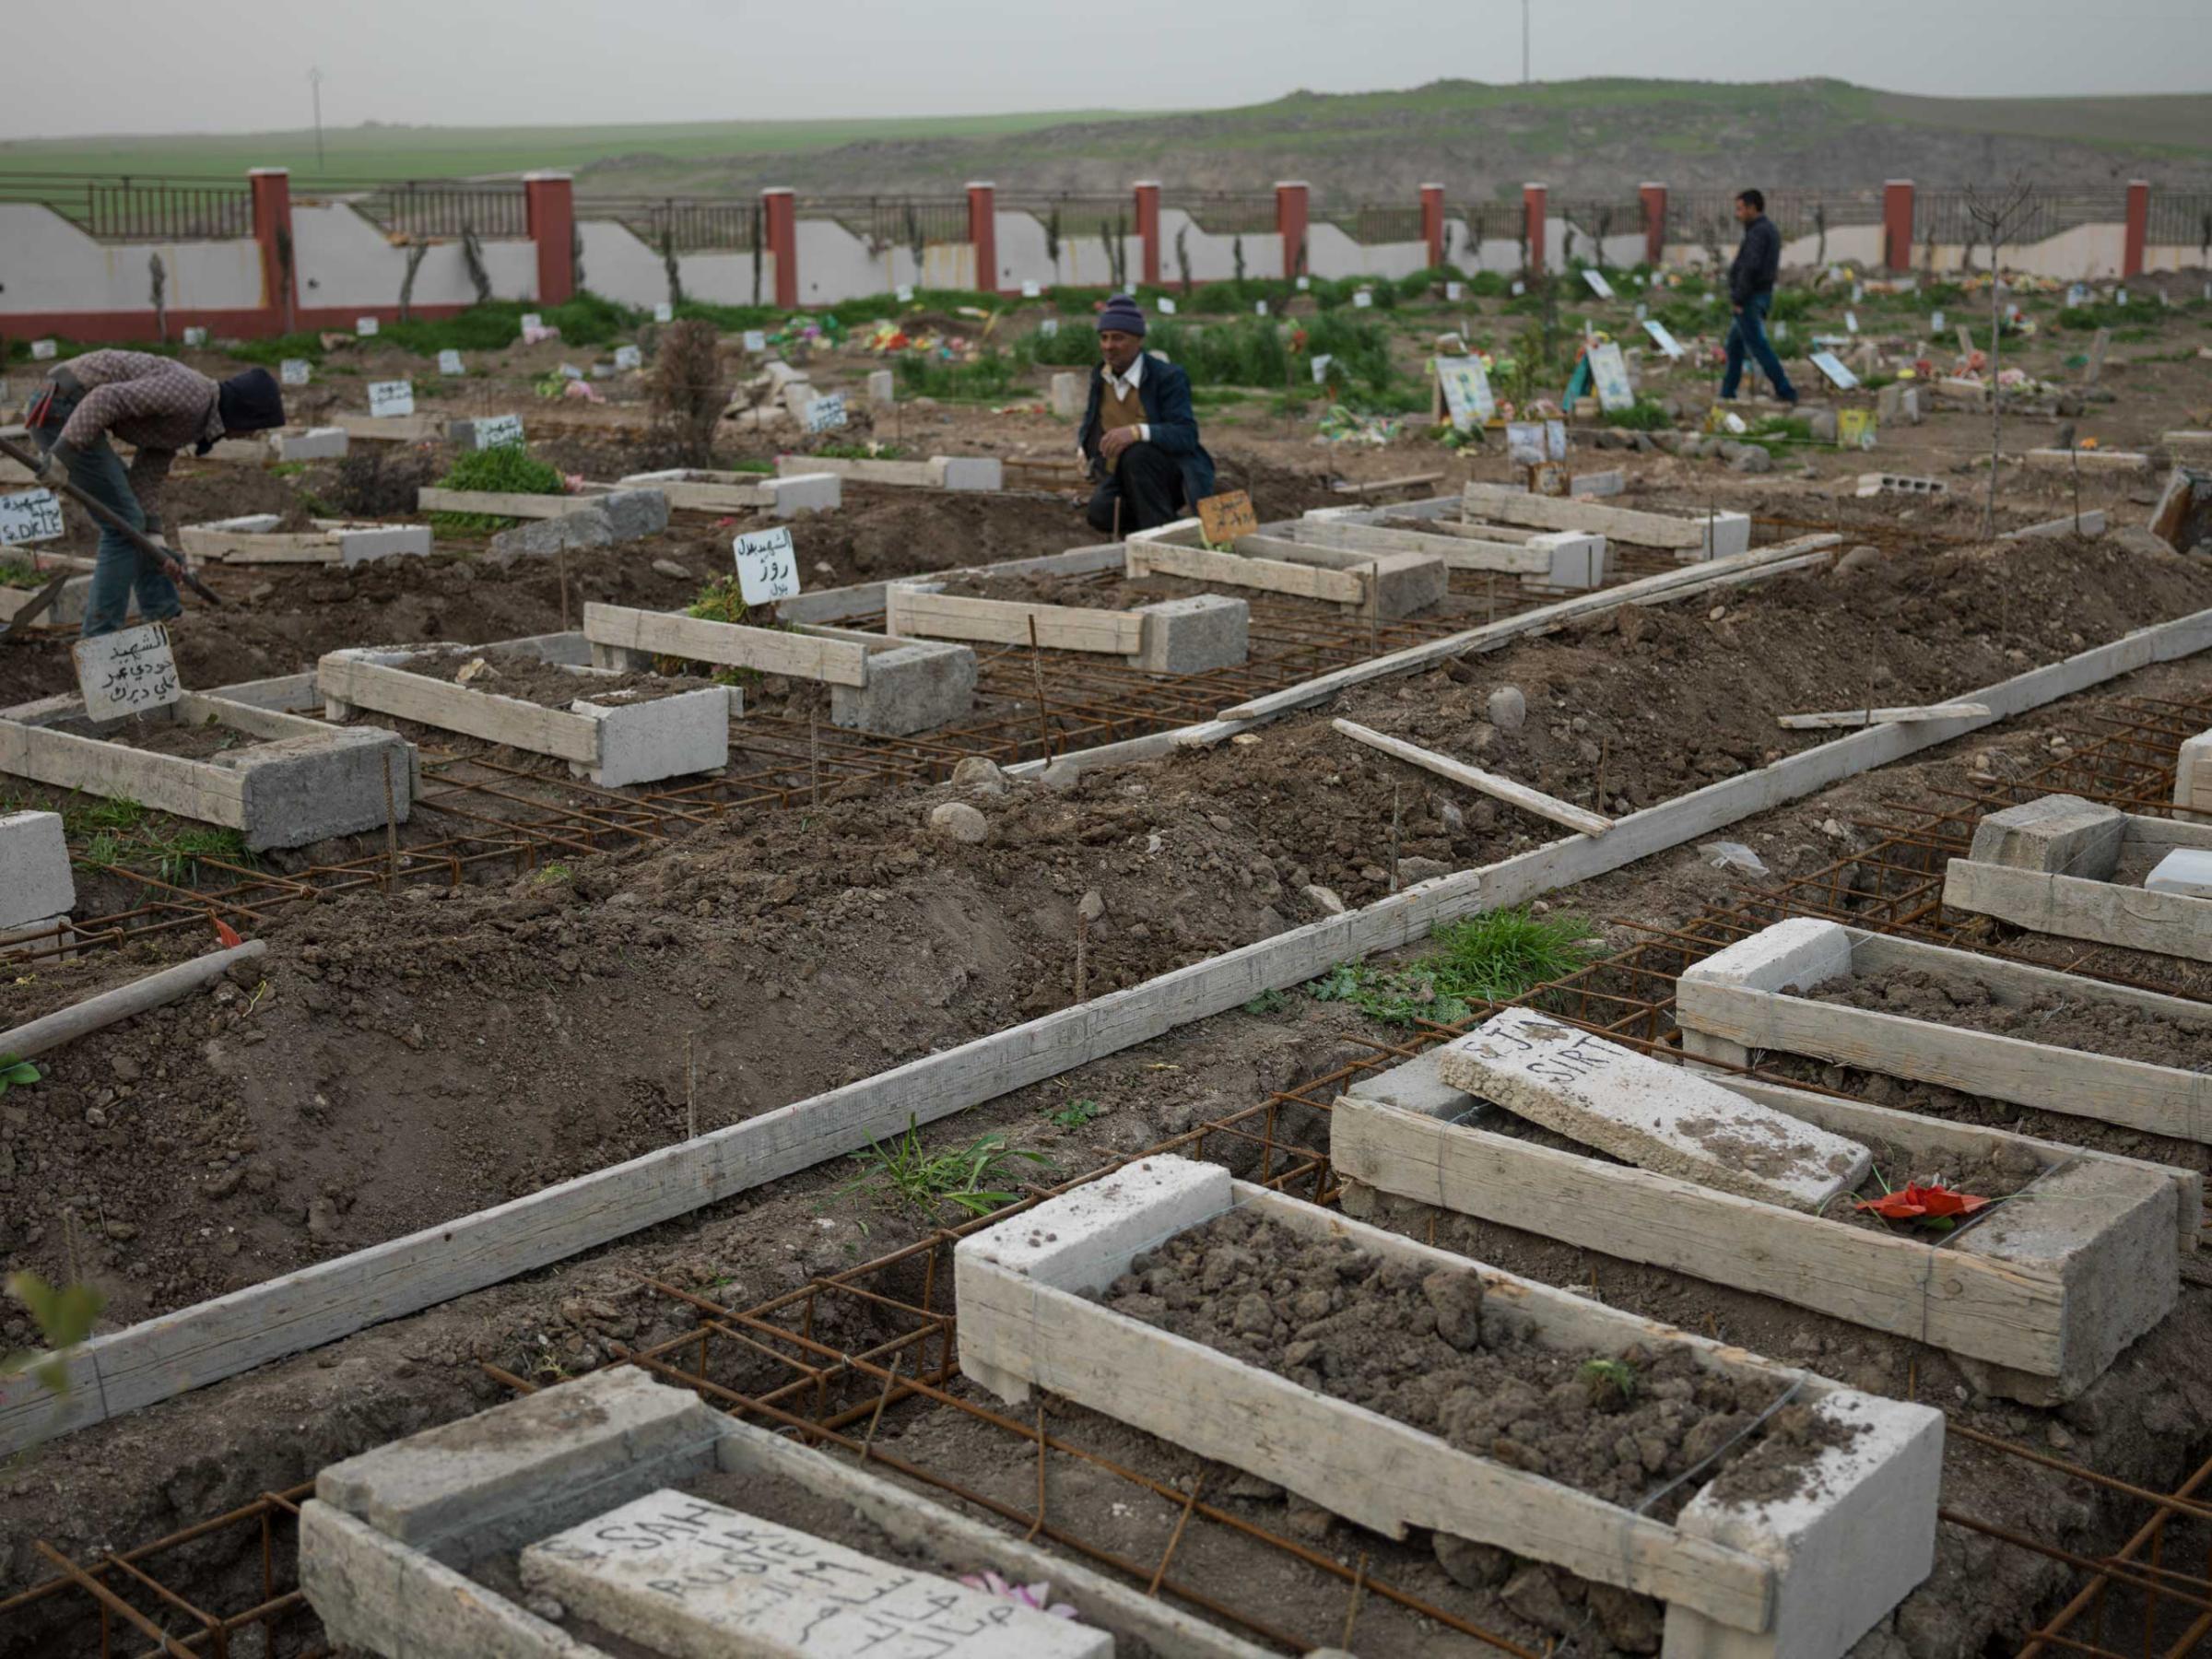 in Syria, graves of YPJ members who were killed fighting ISIS. In the foreground, female fighters are buried together.Newsha Tavakolian for TIME